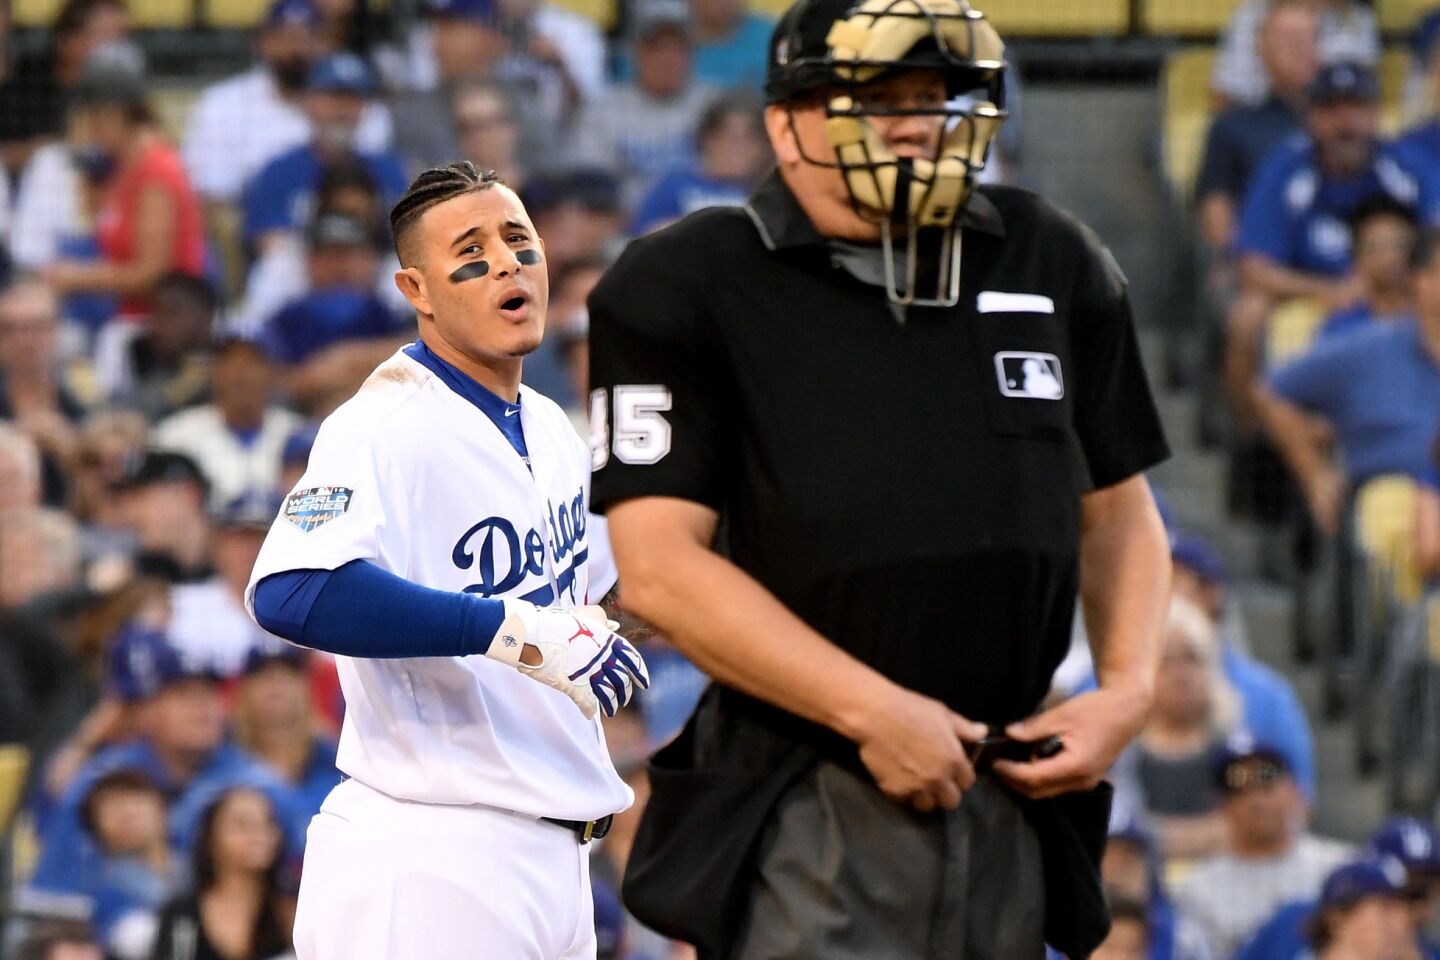 Ddogers Manny Machado complains to home plate umpire Jeff Nelson afgter striking out against the Red Sox in the 1st inning.